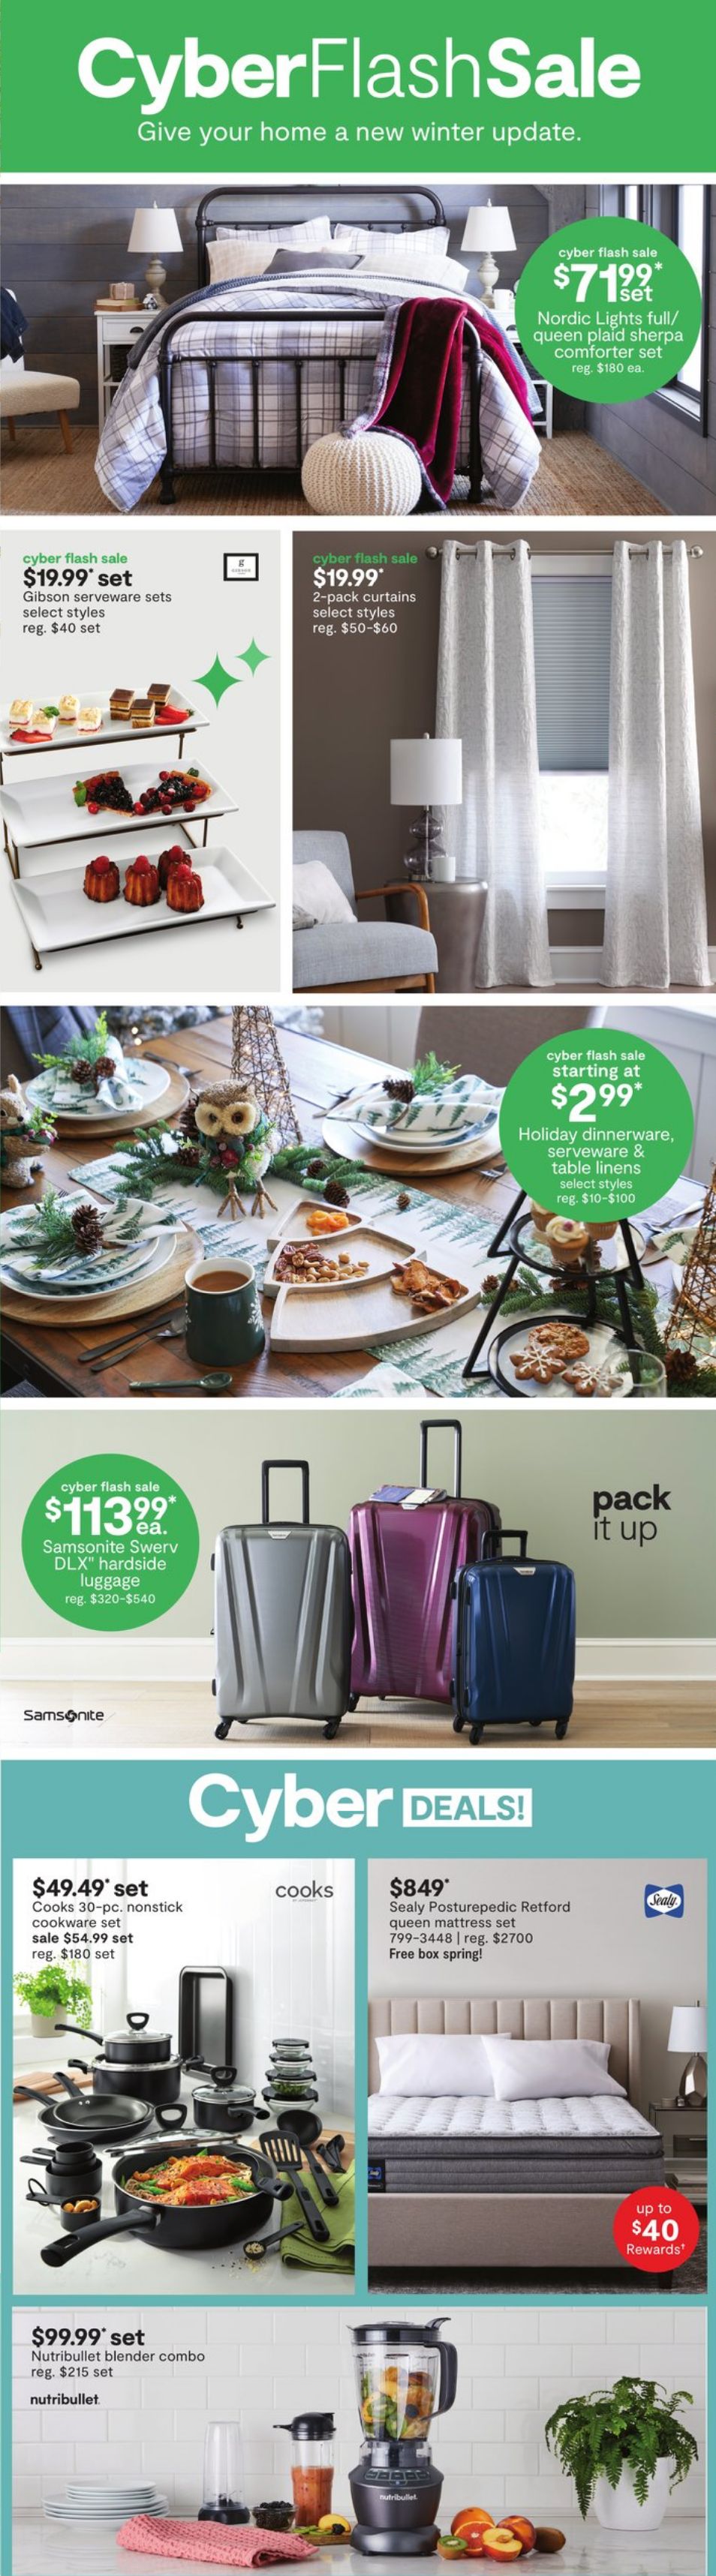 Weekly ad JC Penney 11/28/2022 - 11/29/2022